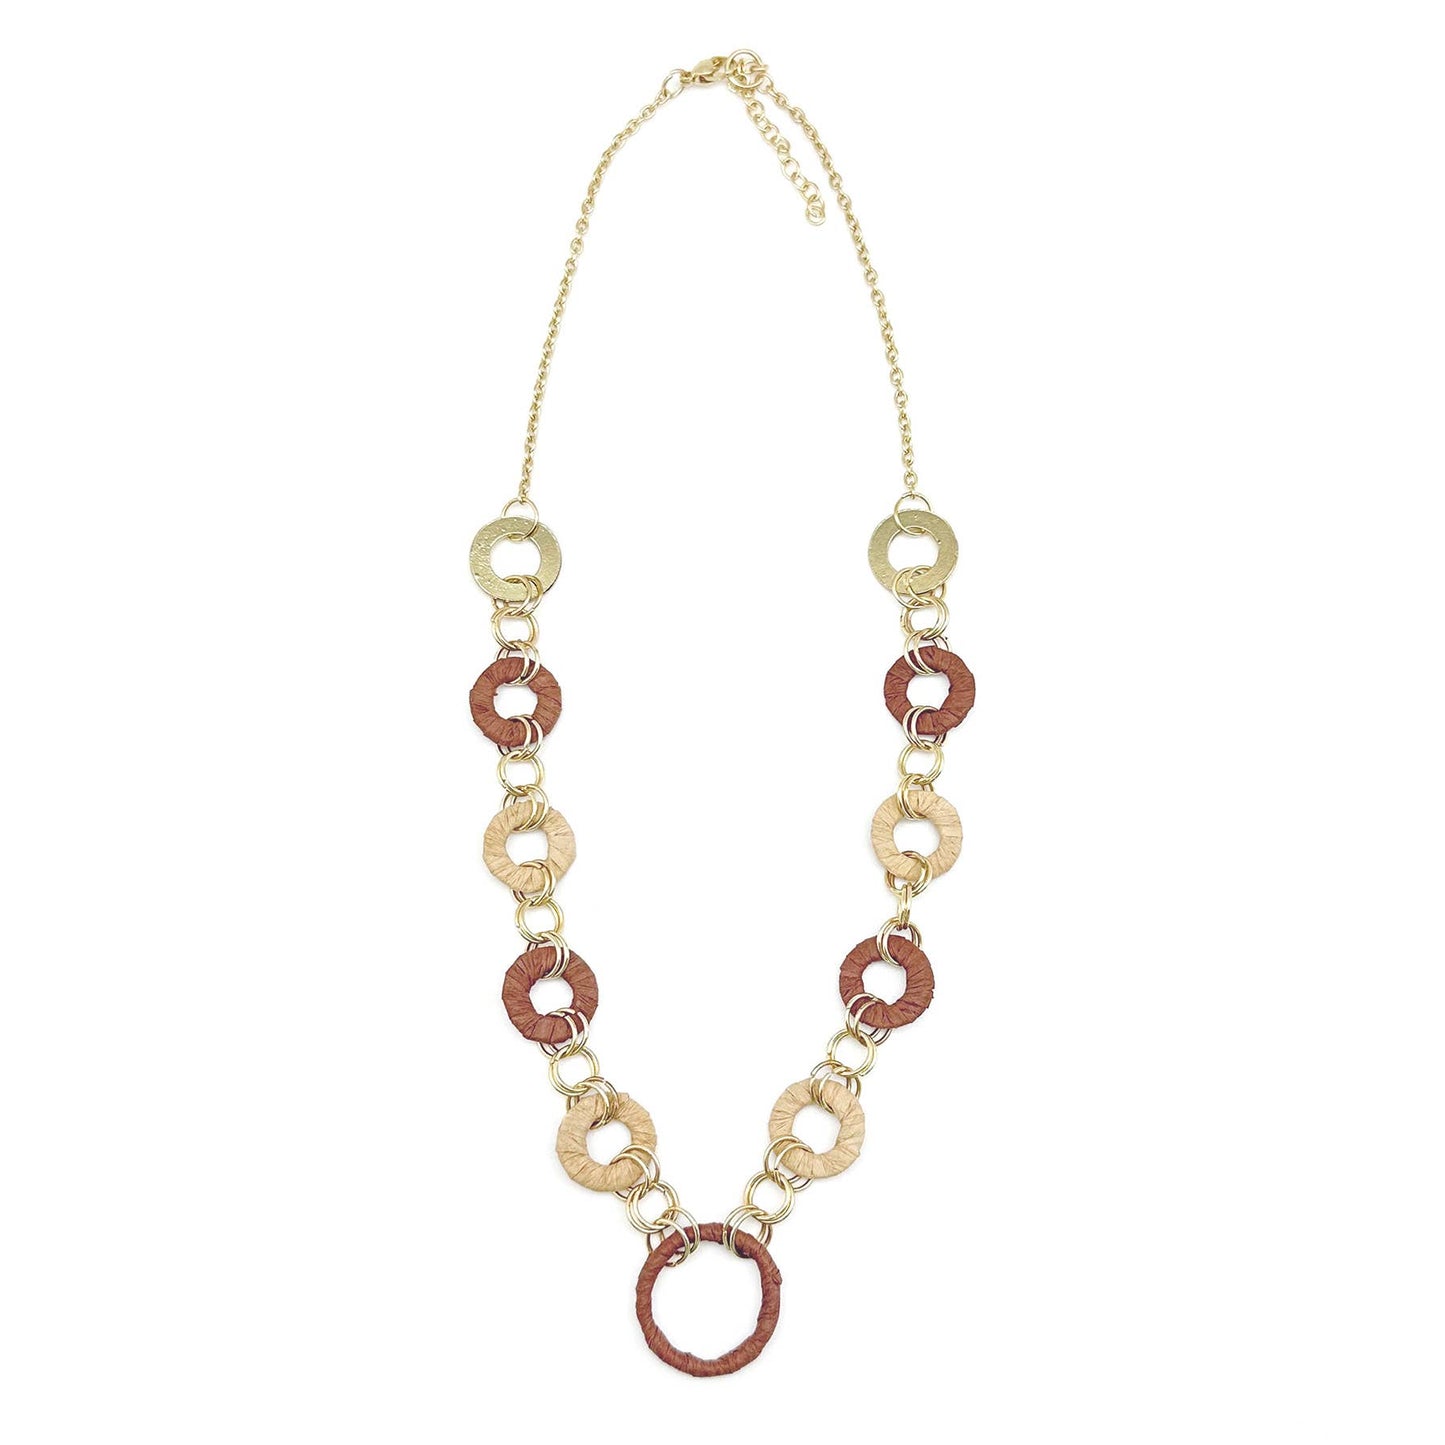 Sachi Raffia Rings Necklace - Tan and Brown Small Rings